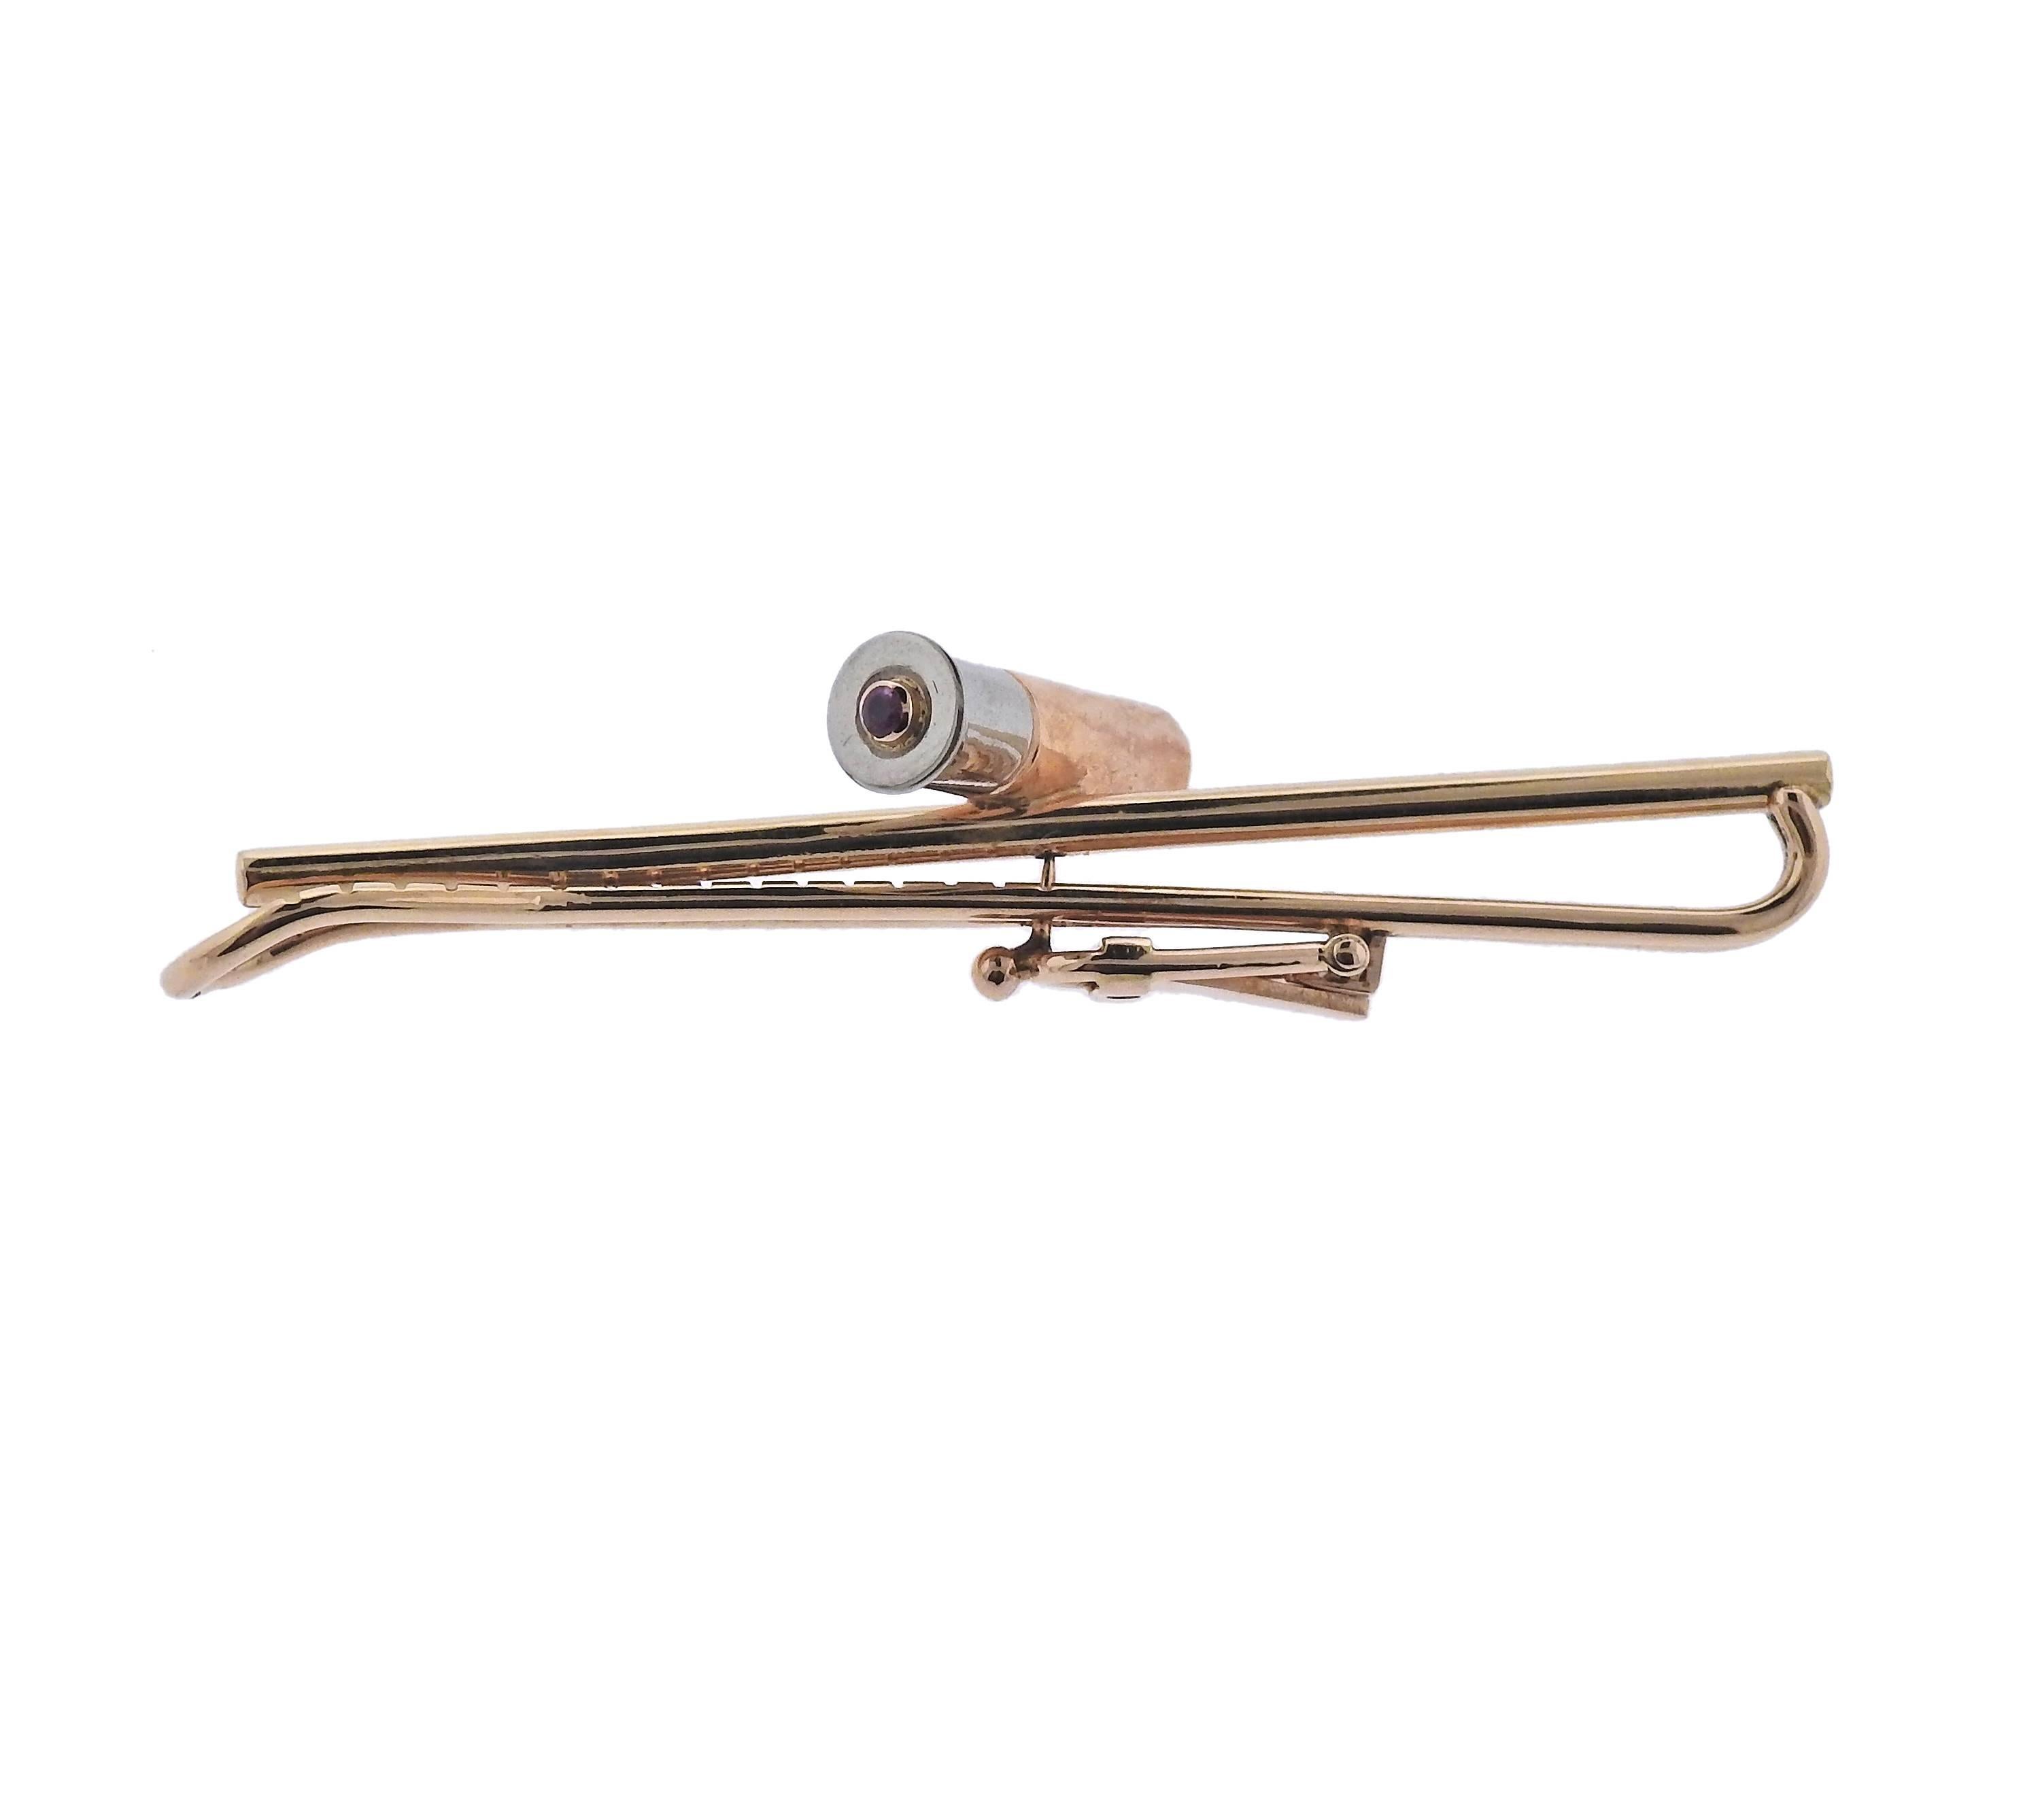 18k yellow and white gold shotgun tie bar clip. Clip measures 58mm x 18mm, weighs 9.2 grams.